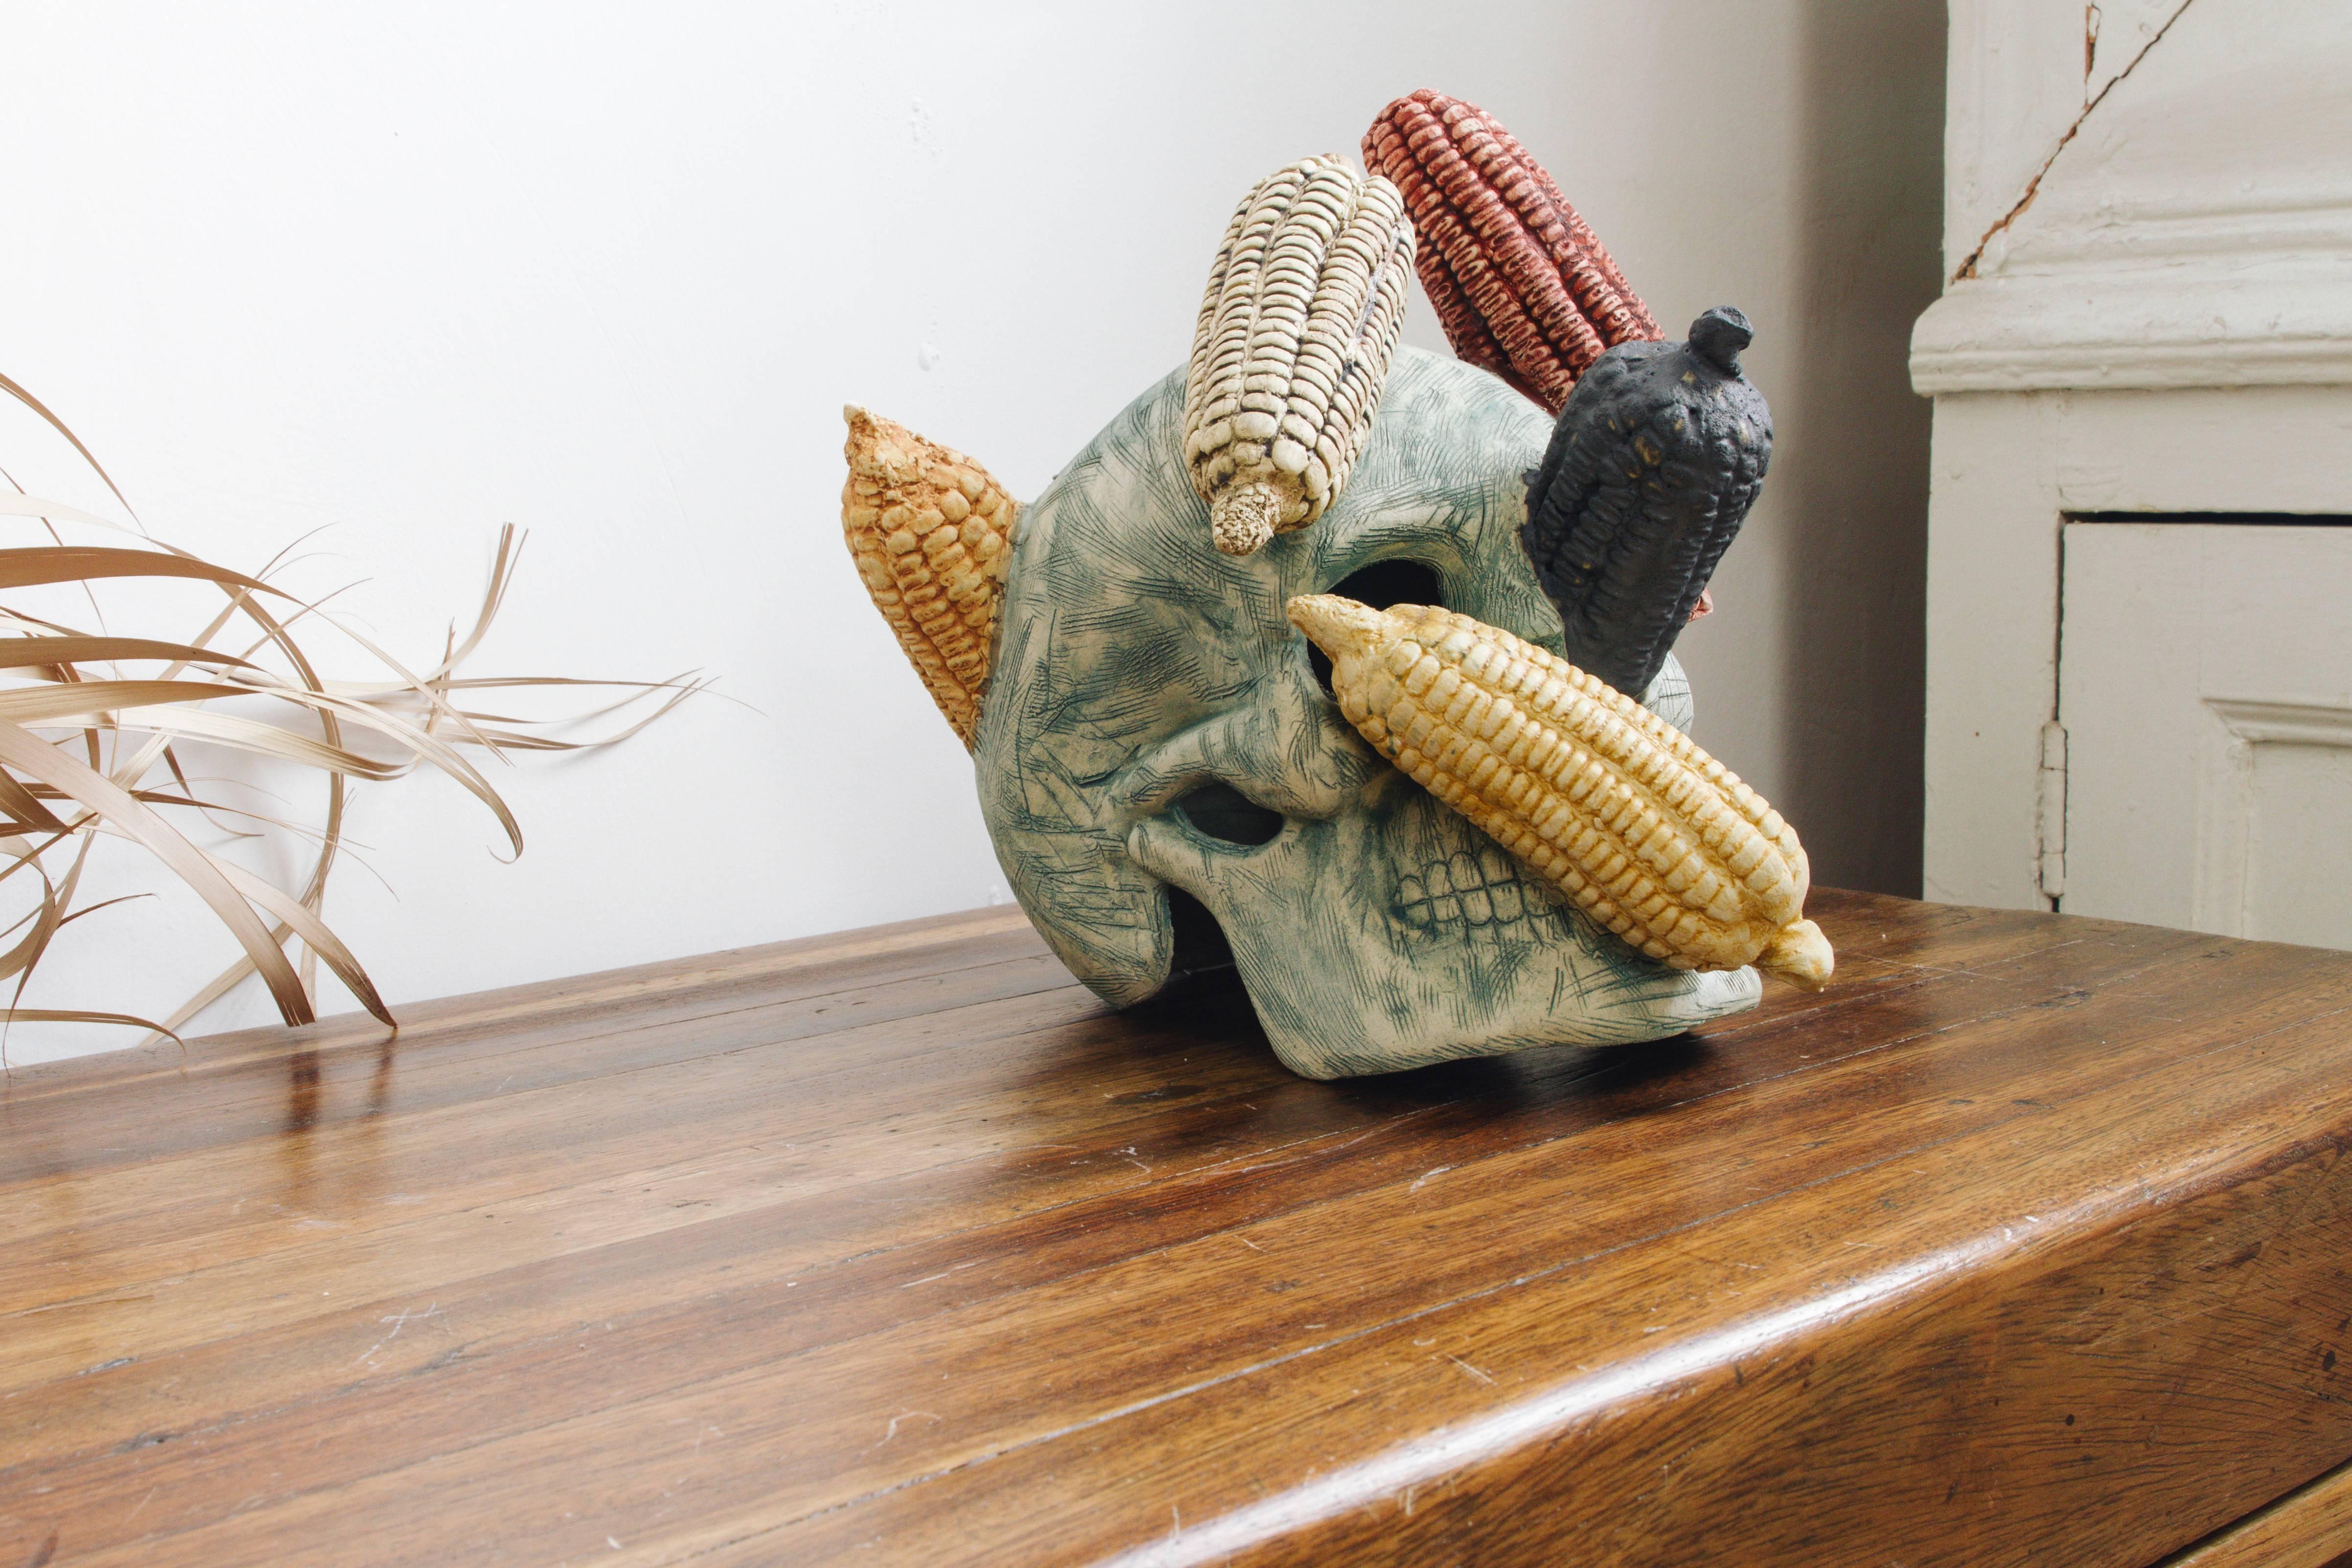 “My purpose in making this skull is to represent the different types of native maize that since remote times have brought food security to our ancestors, giving them the time to develop the knowledge and arts to the extent they did,” says Mexican